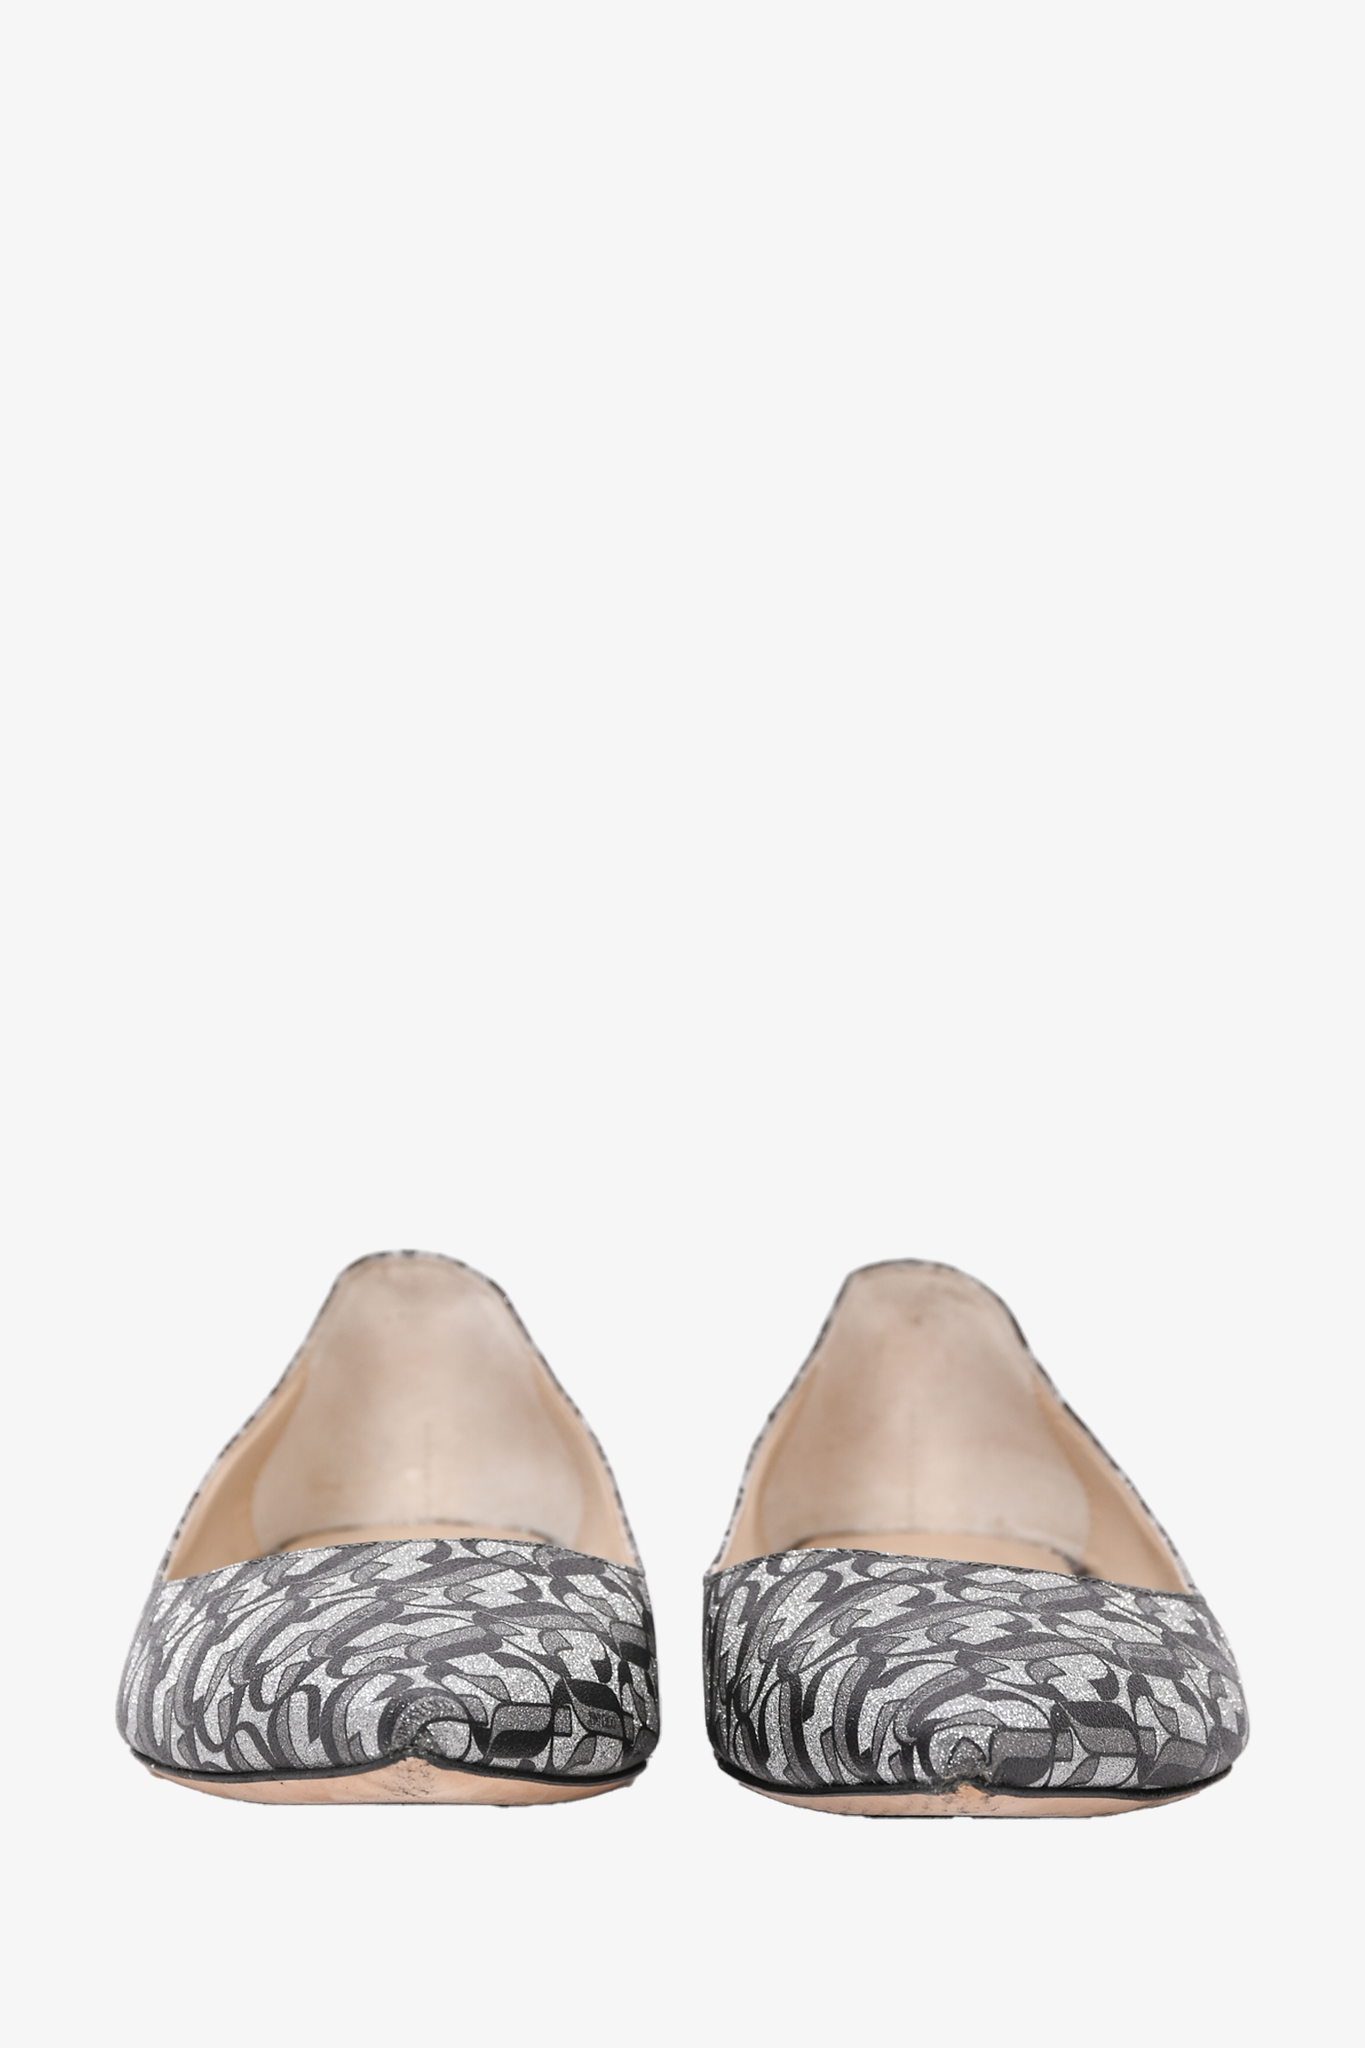 Jimmy Choo Silver Glitter Patterned Pointed Flats Size 37.5